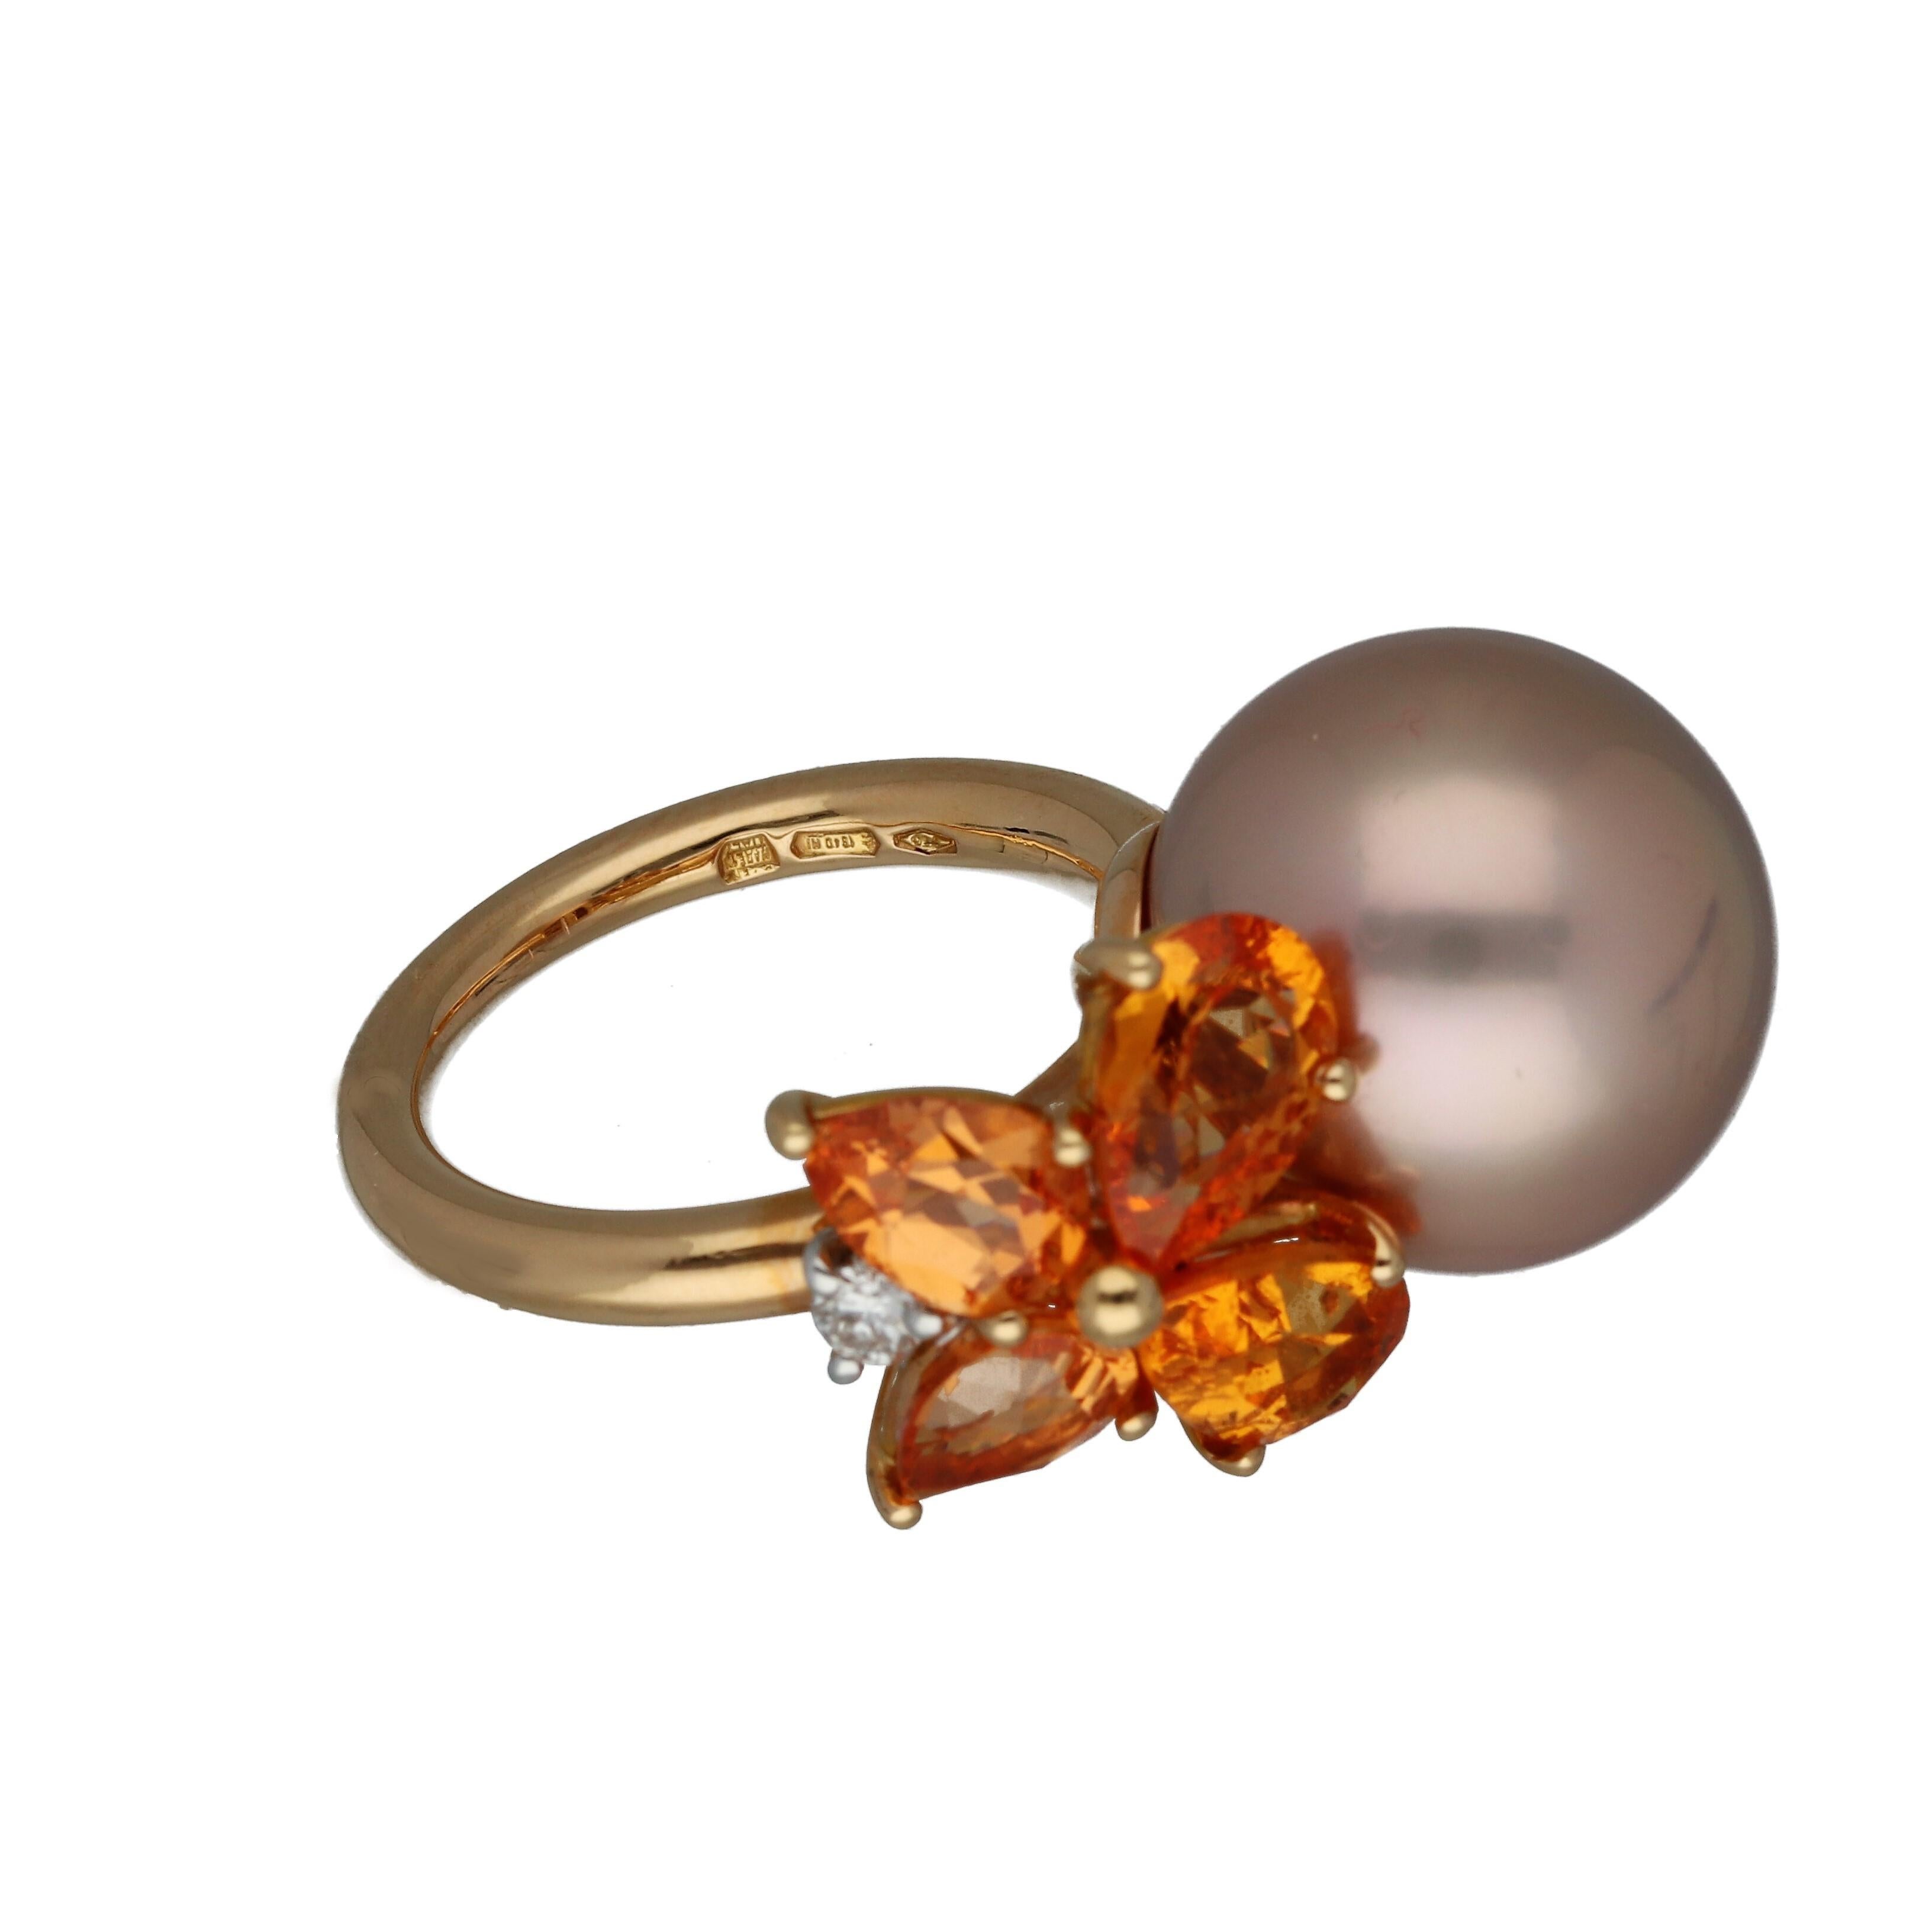 MiMI  18K Yellow Gold cocktail ring features a cultured pearl, a 0,15 ct round-cut diamond, and 4 mandarin garnets. 

RING SIZE US 6.75 - 53.8 mm

Mandarin Garnet has a captivating and intense orange color that recalls the glowing evening sky in